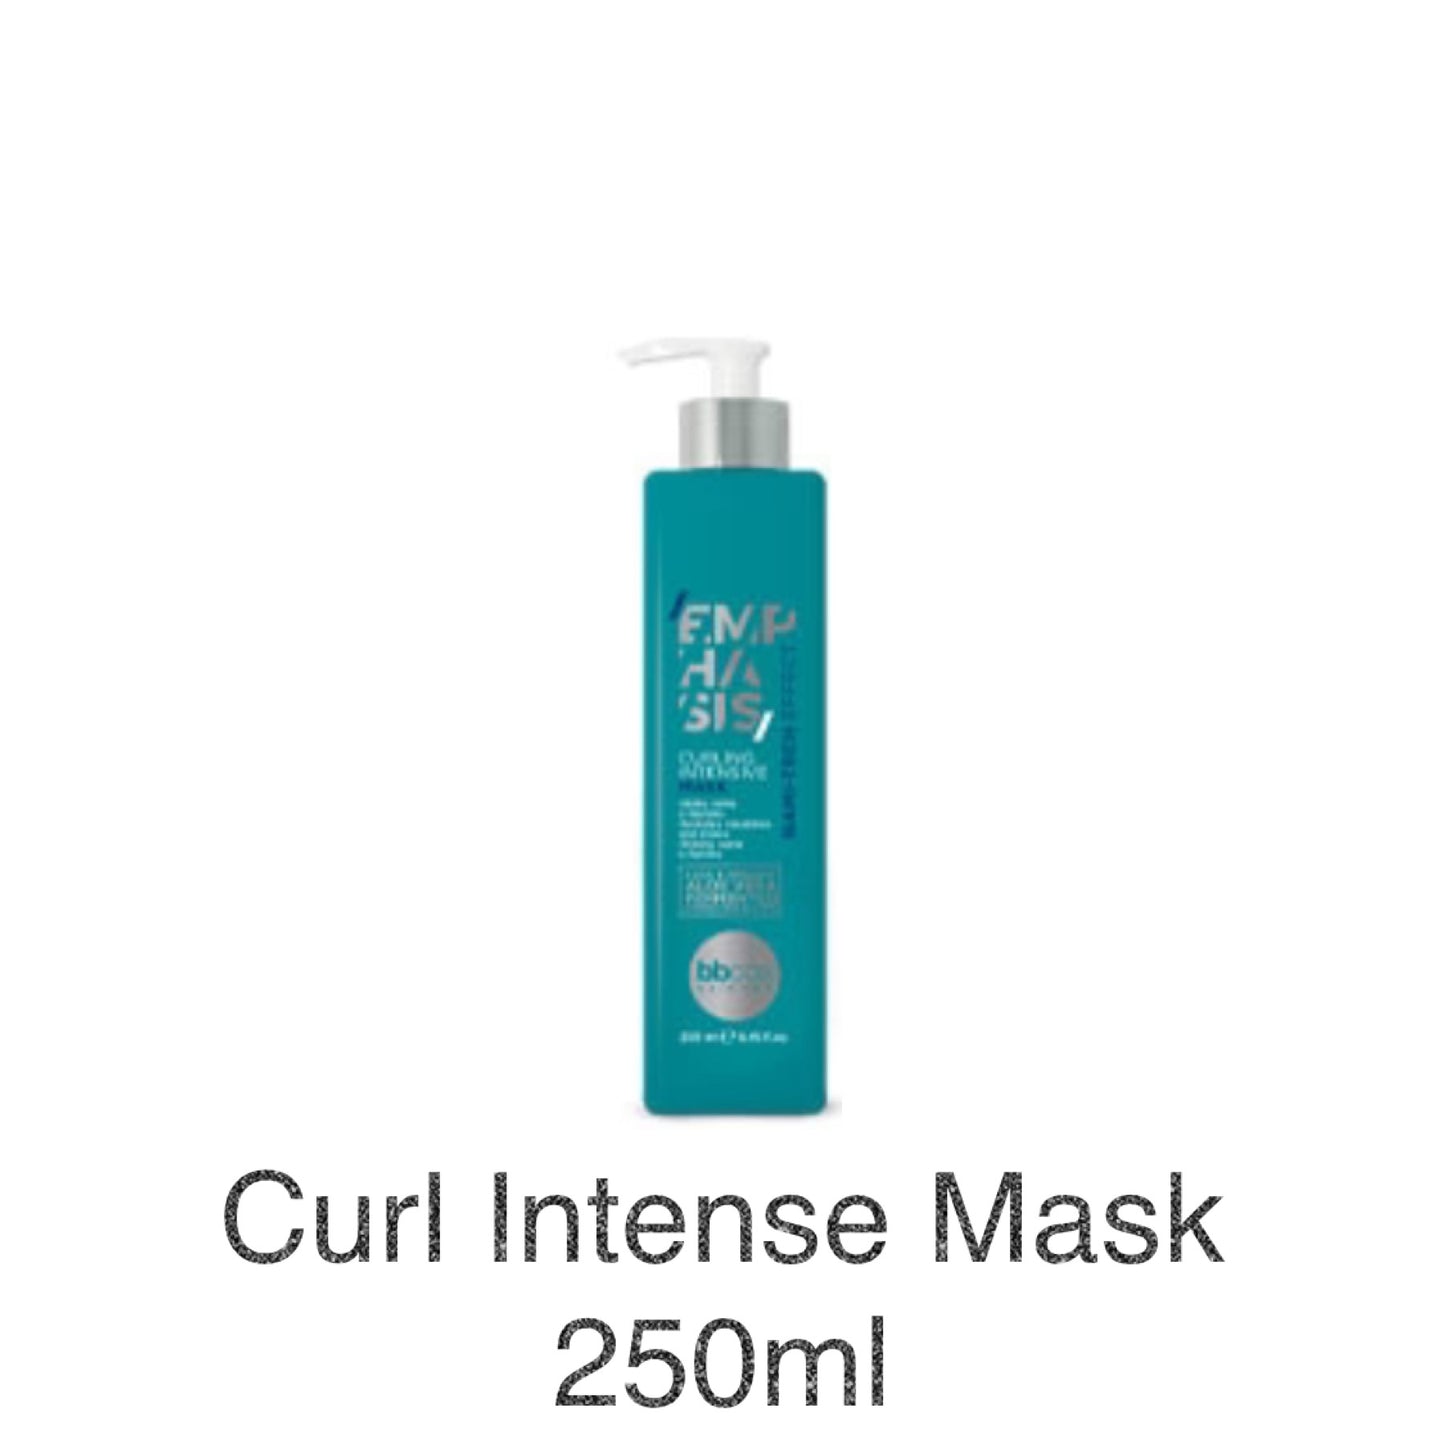 MHP- Italian Emphasis Low Curl Hair Mask